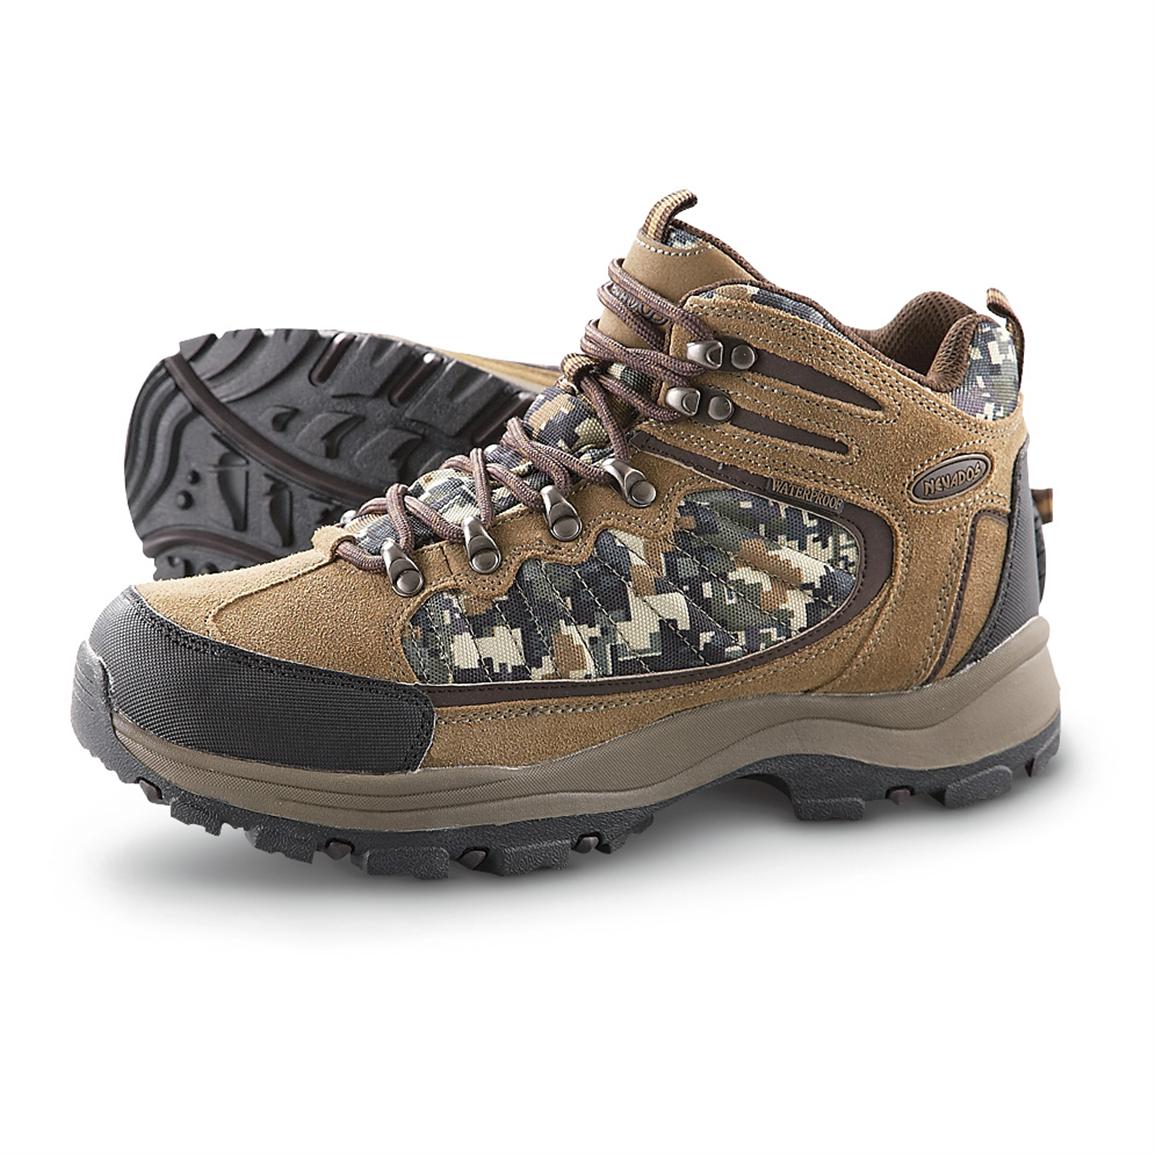 Men's Nevados® 6" Waterproof Camo Hikers - 183690, Hiking Boots & Shoes